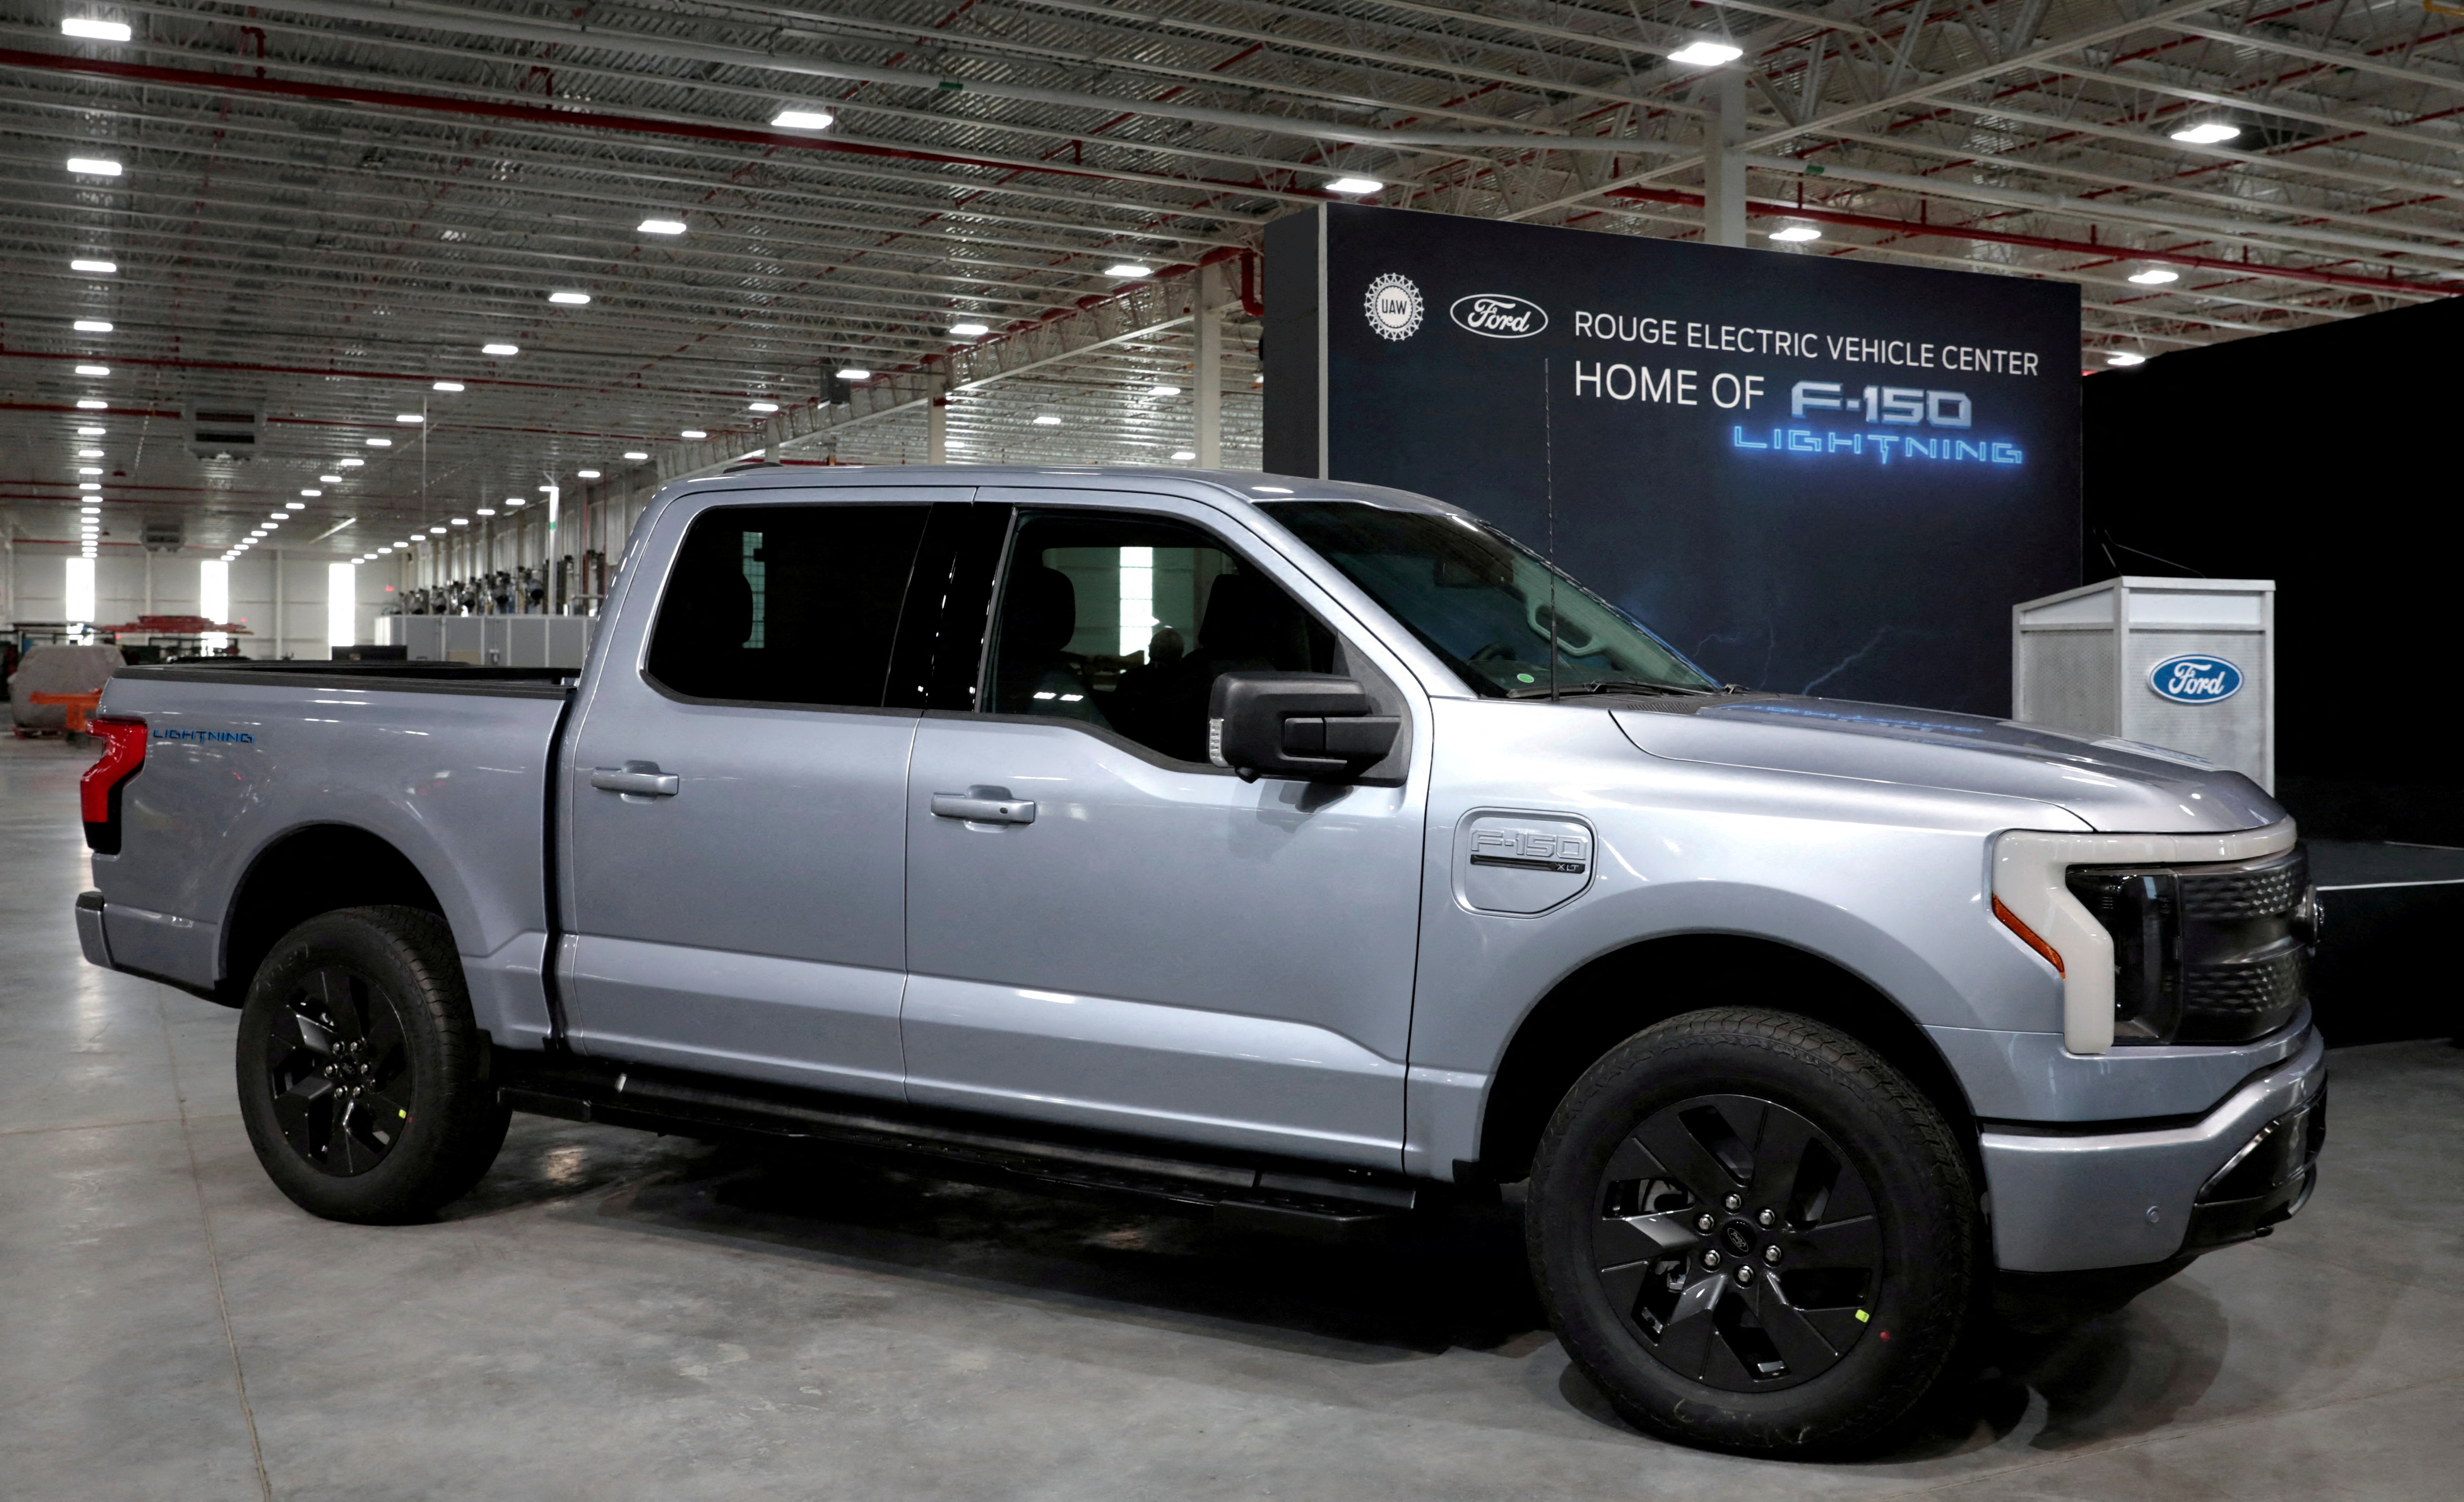 Ford Motors pre-production all-electric F-150 Lightning truck prototype is seen in Dearborn